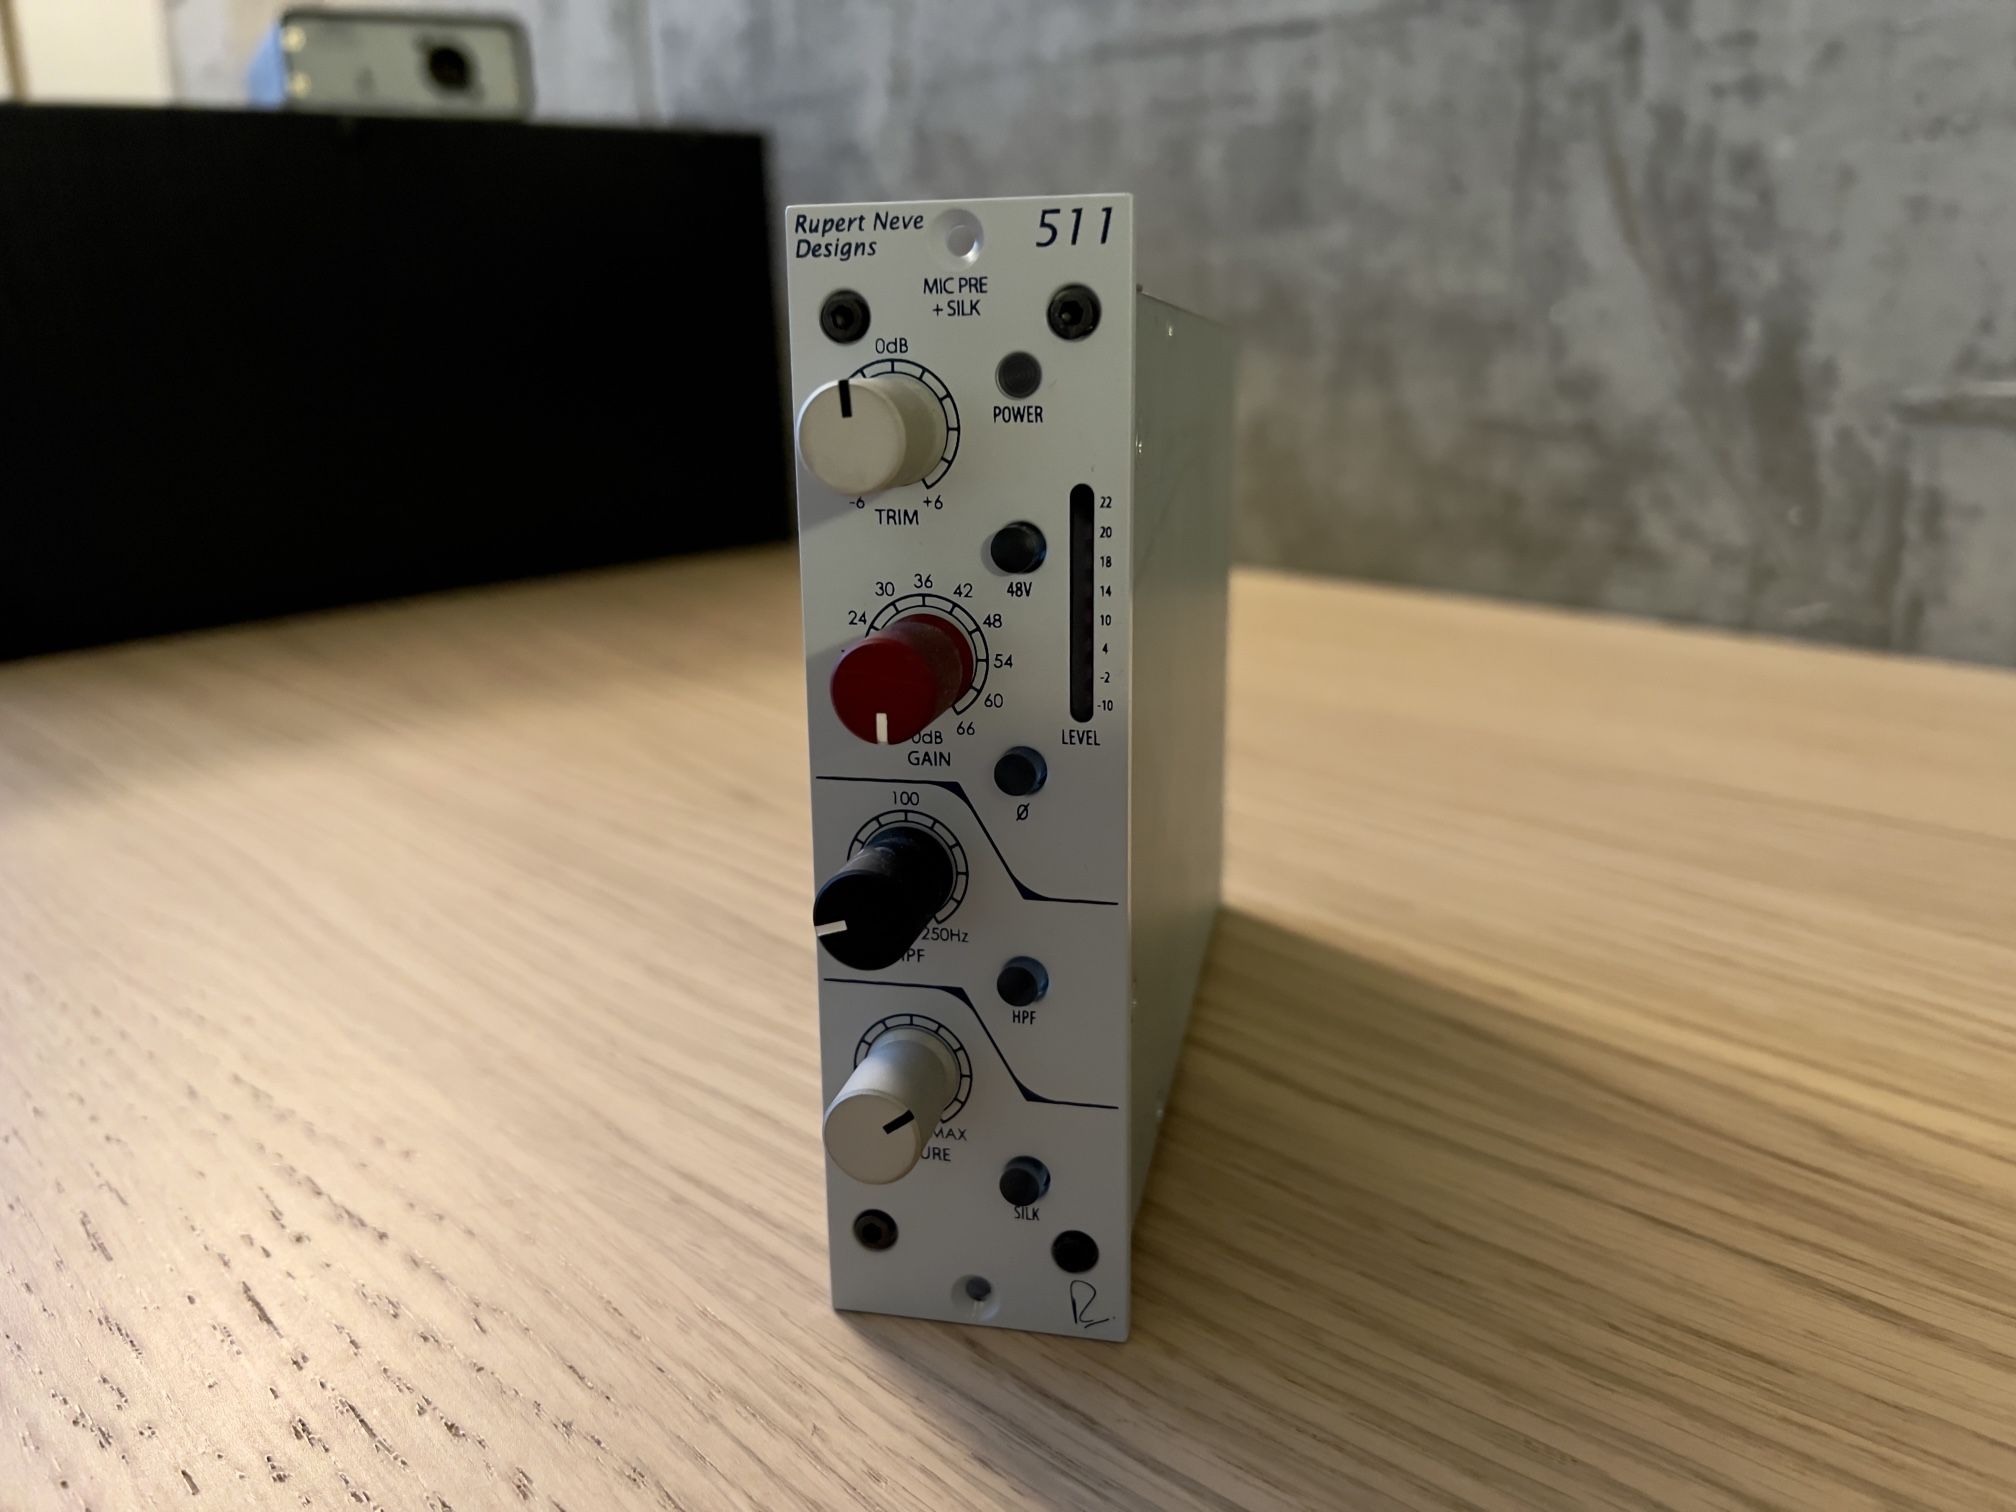 Rupert Neve Designs Portico 511 500-Series Mic Pre Module with Silk for  Sale in Los Angeles, CA OfferUp